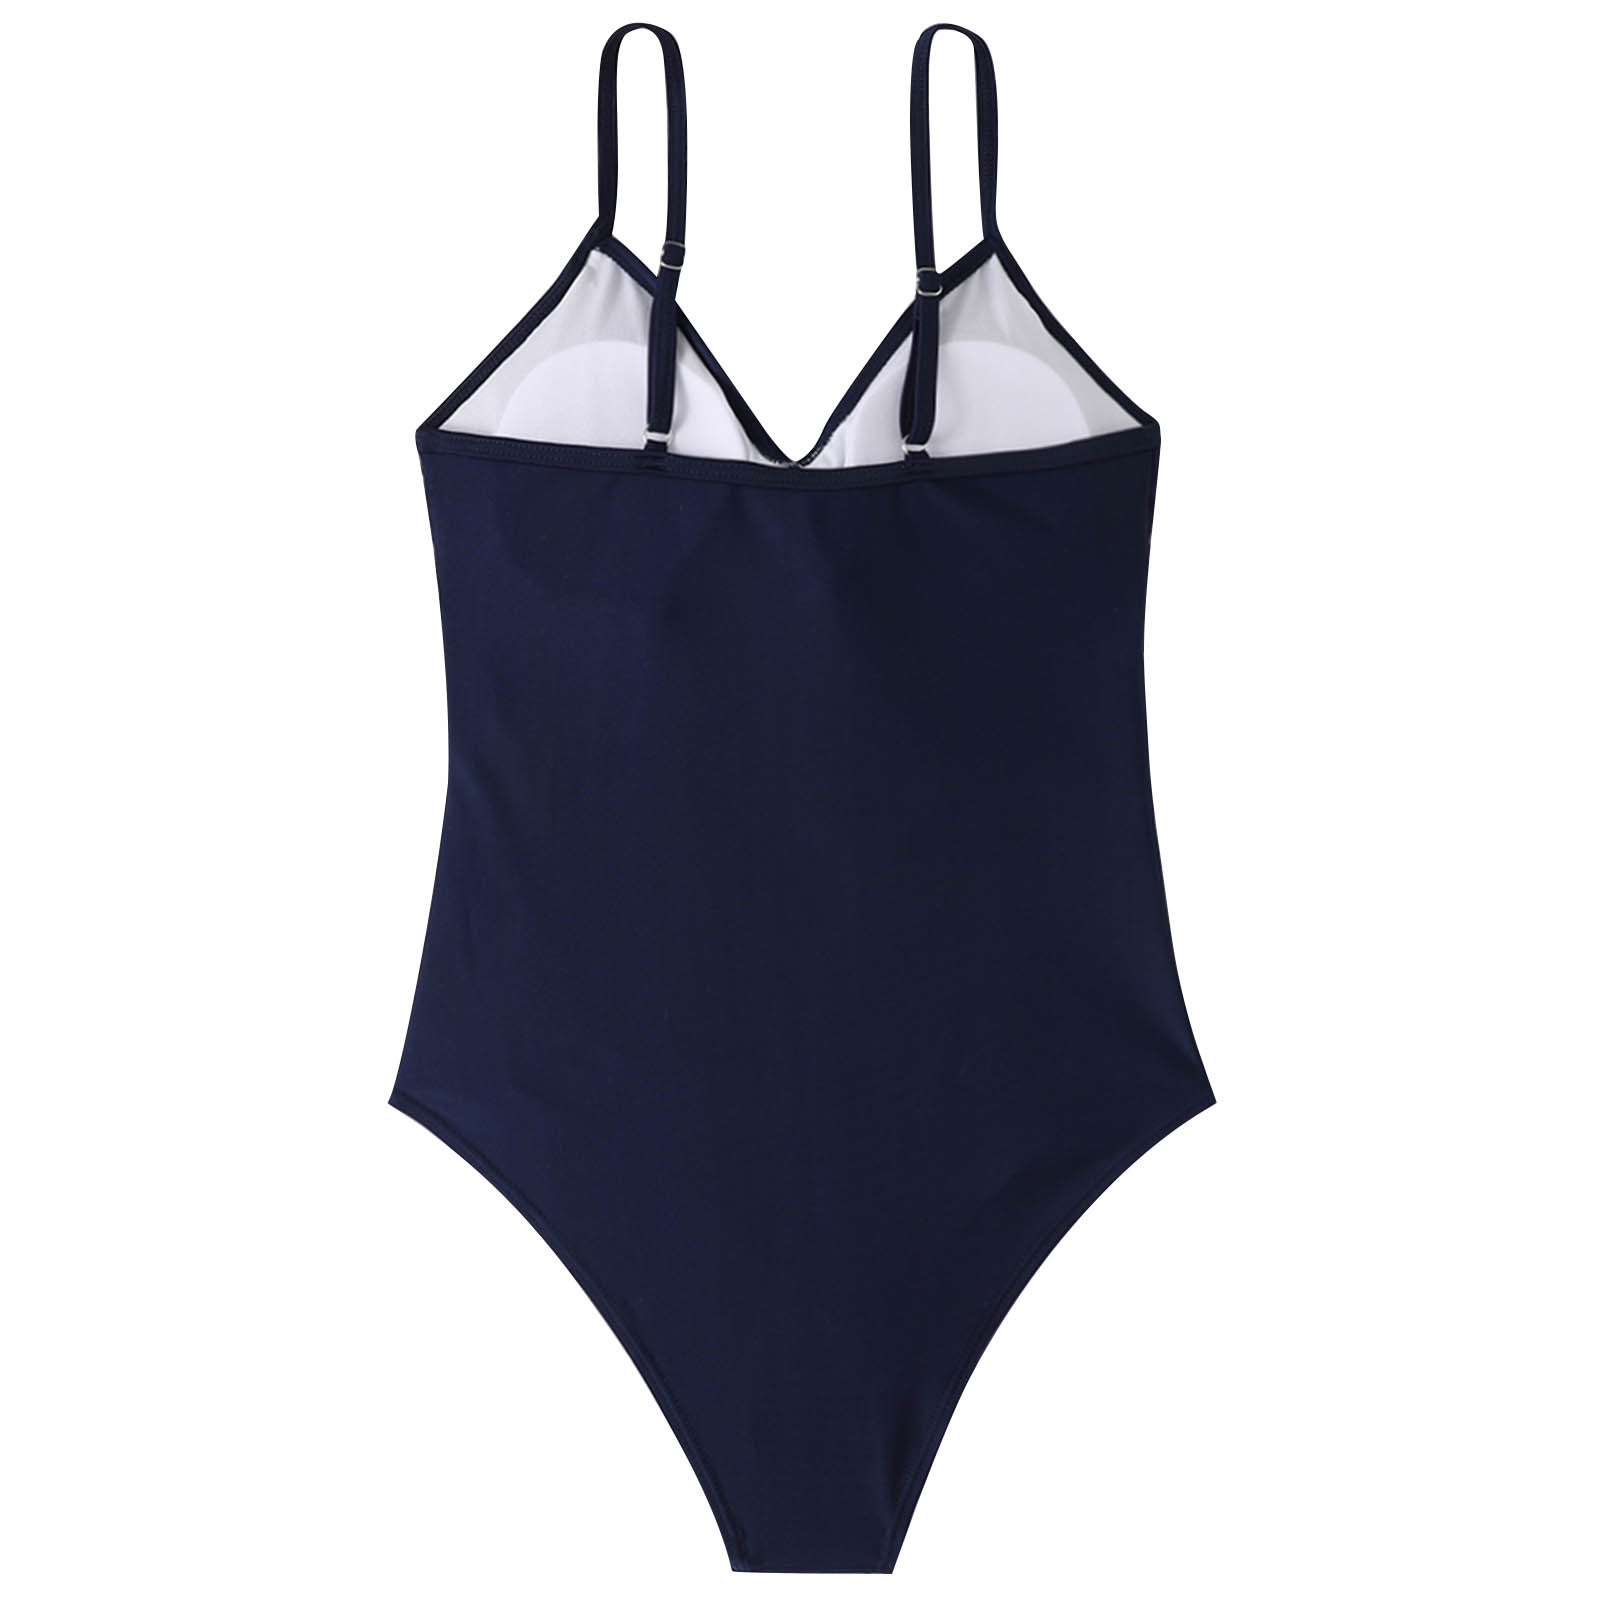 Cethrio One Piece Bathing Suit-Women Swimsuits Sexy Solid with Chest ...